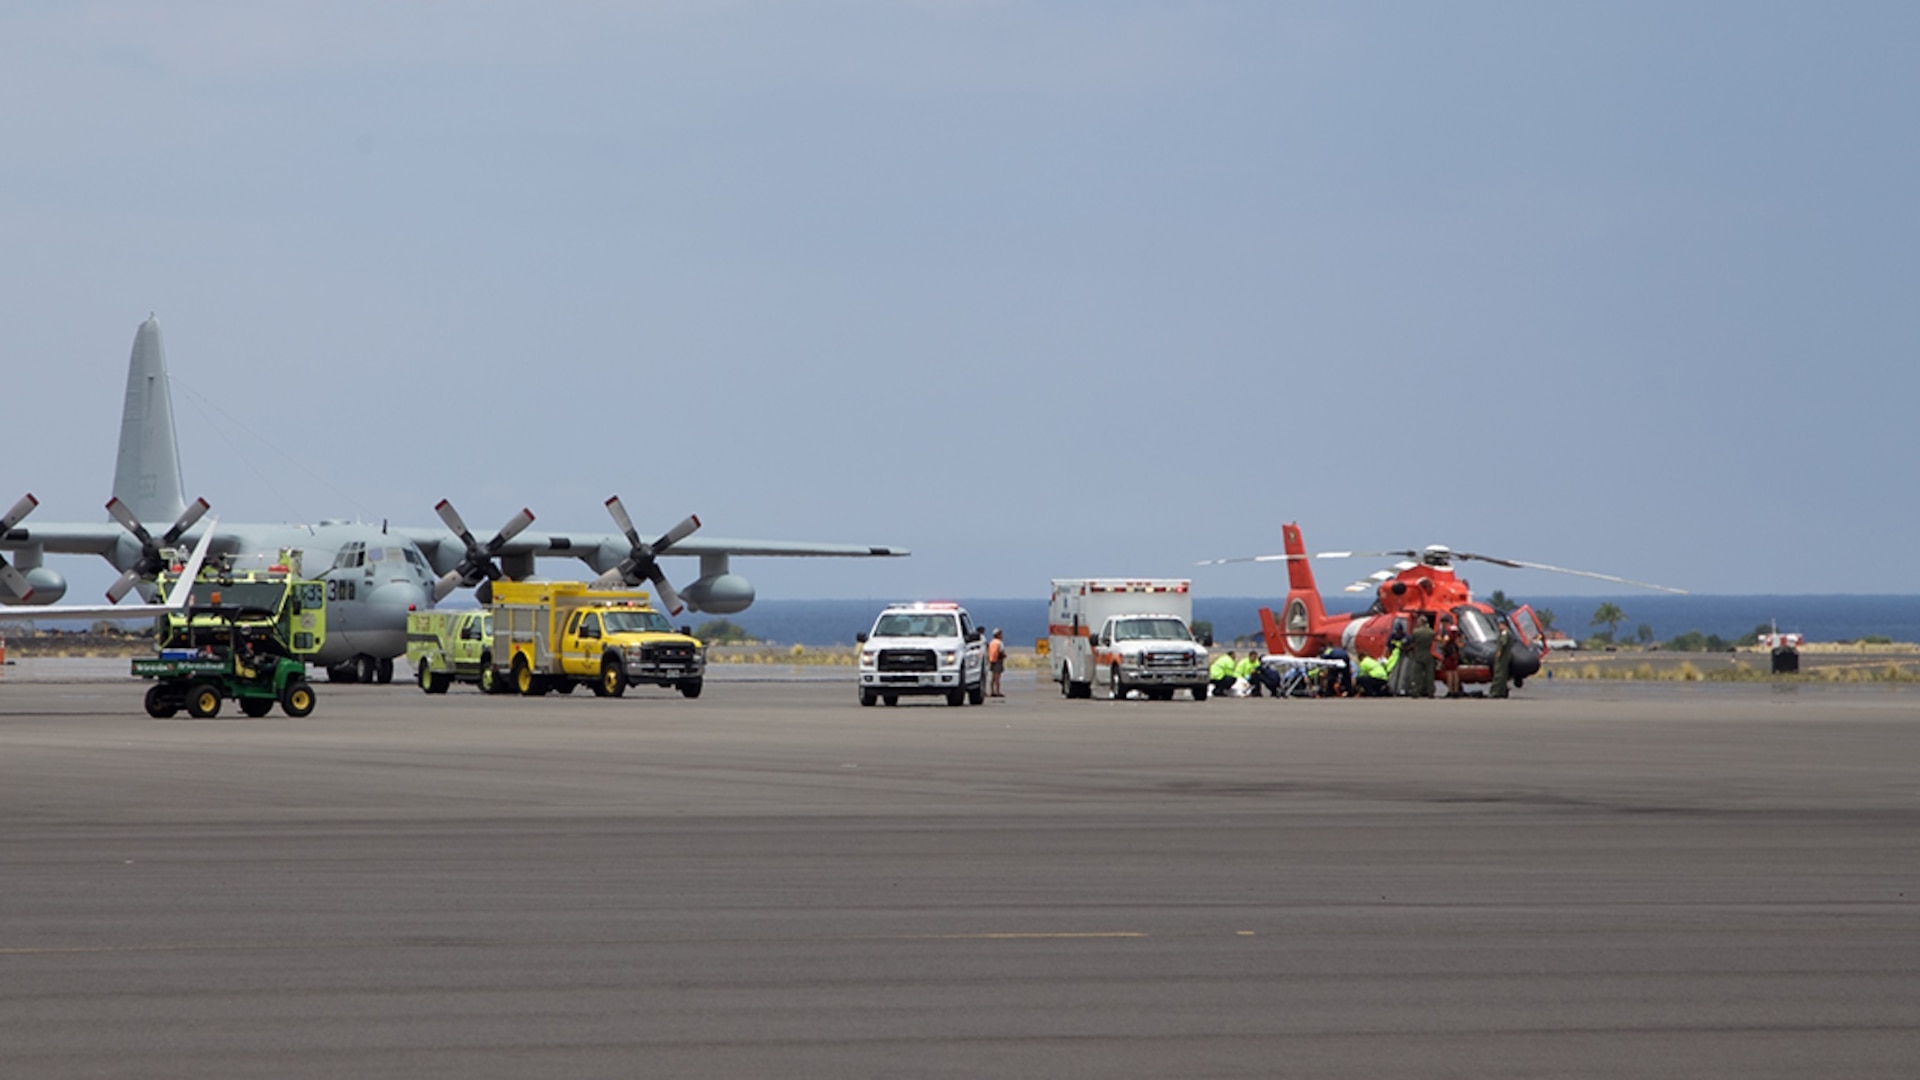 Coast Guard crews safely deliver David McMahon and Sidney Uemoto to emergency medical personnel in Kona, Hawaii, July 15, 2016, following their rescue nine miles off Kona. They were both rescued by a Coast Guard MH-65 Dolphin helicopter crew following an expansive joint search by Navy, Royal New Zealand air force, U.S. Air Force and Coast Guard crews. They reportedly sustained only minor injures in the crash.